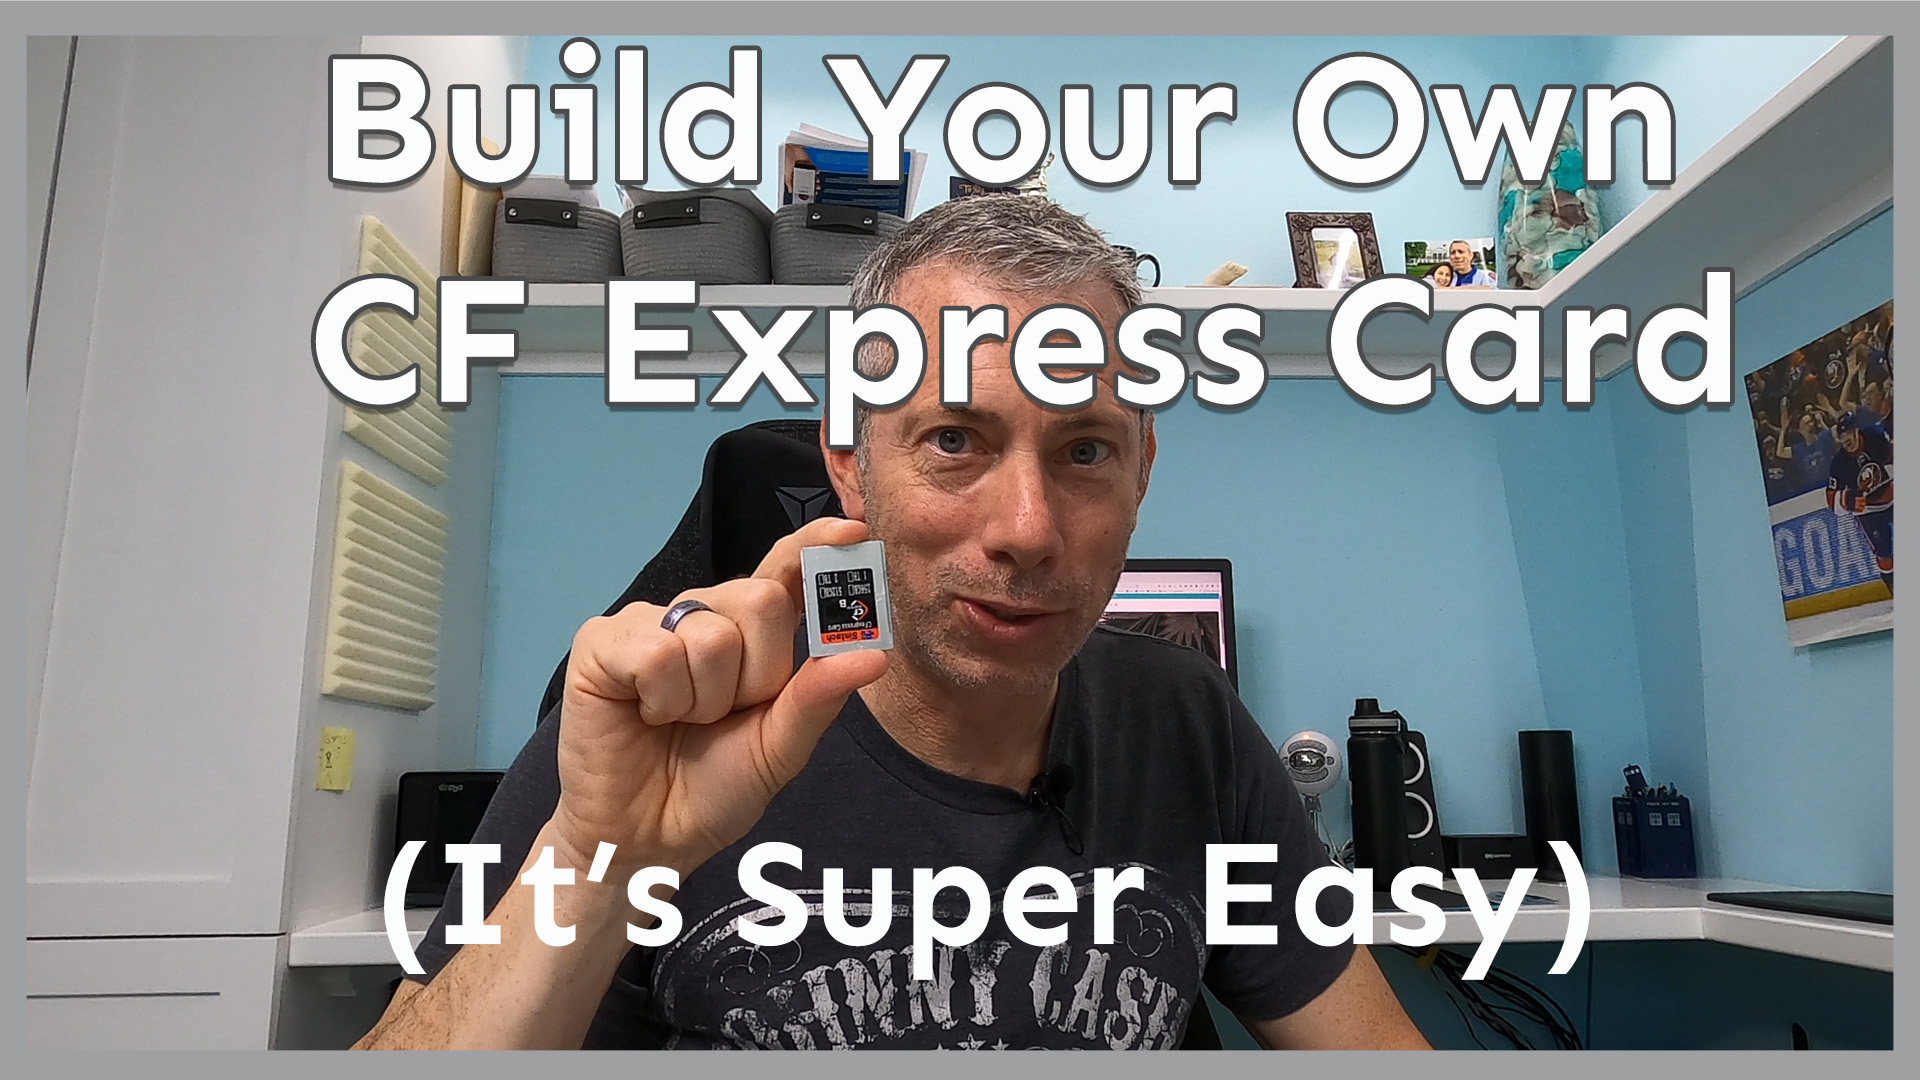 Build your own CFexpress card